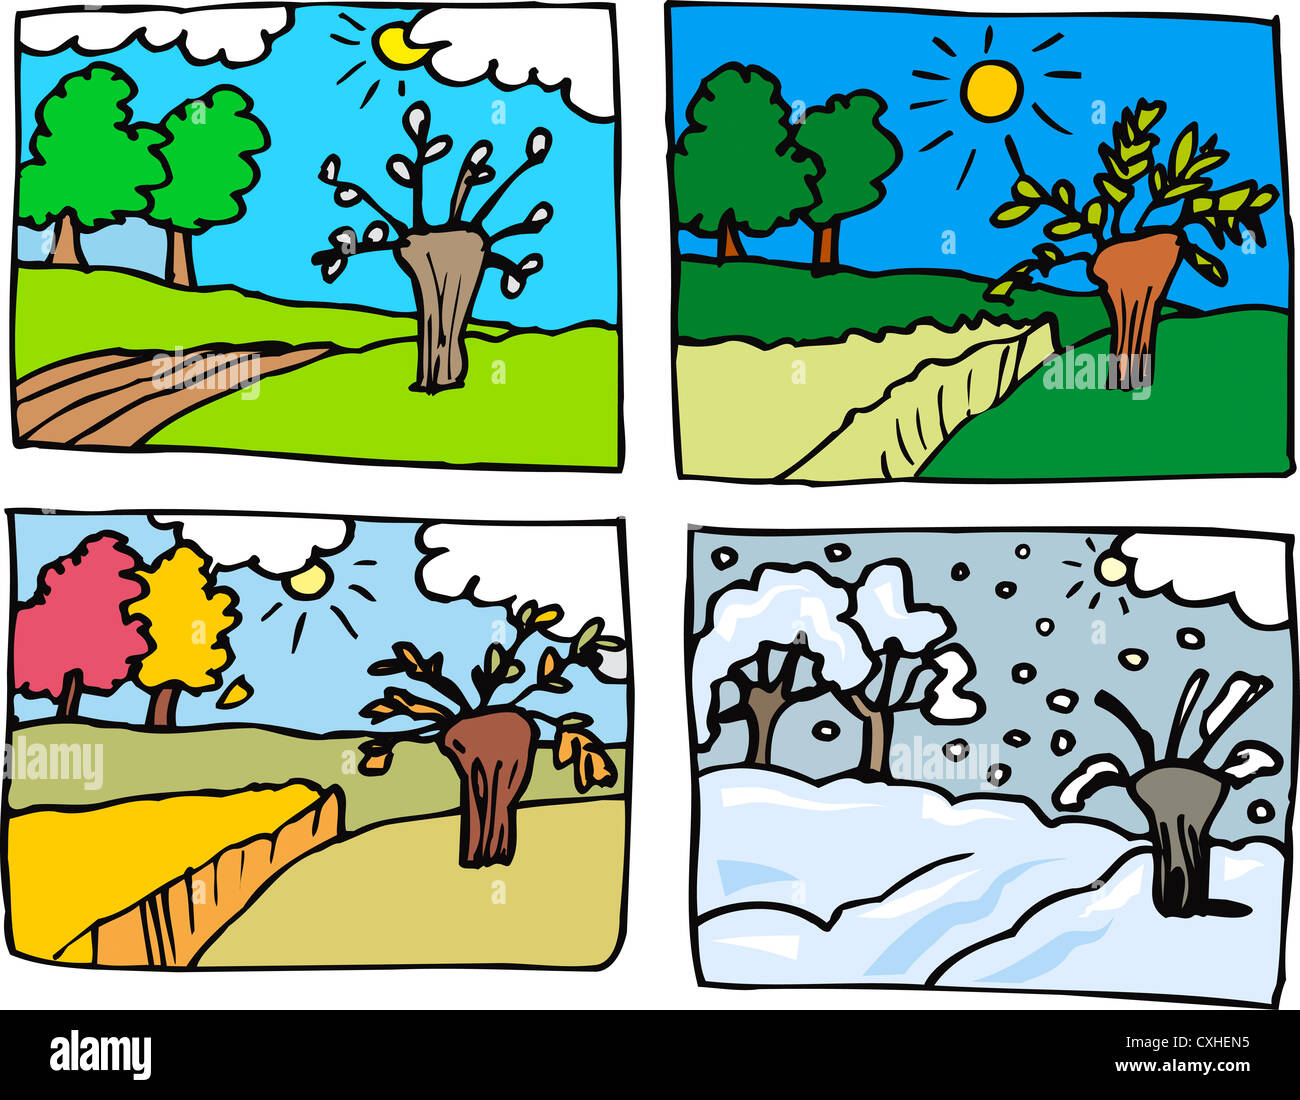 Cartoon Illustration of Rural Landscape in Four Seasons: Spring, Summer, Autumn or Fall and Winter Stock Photo